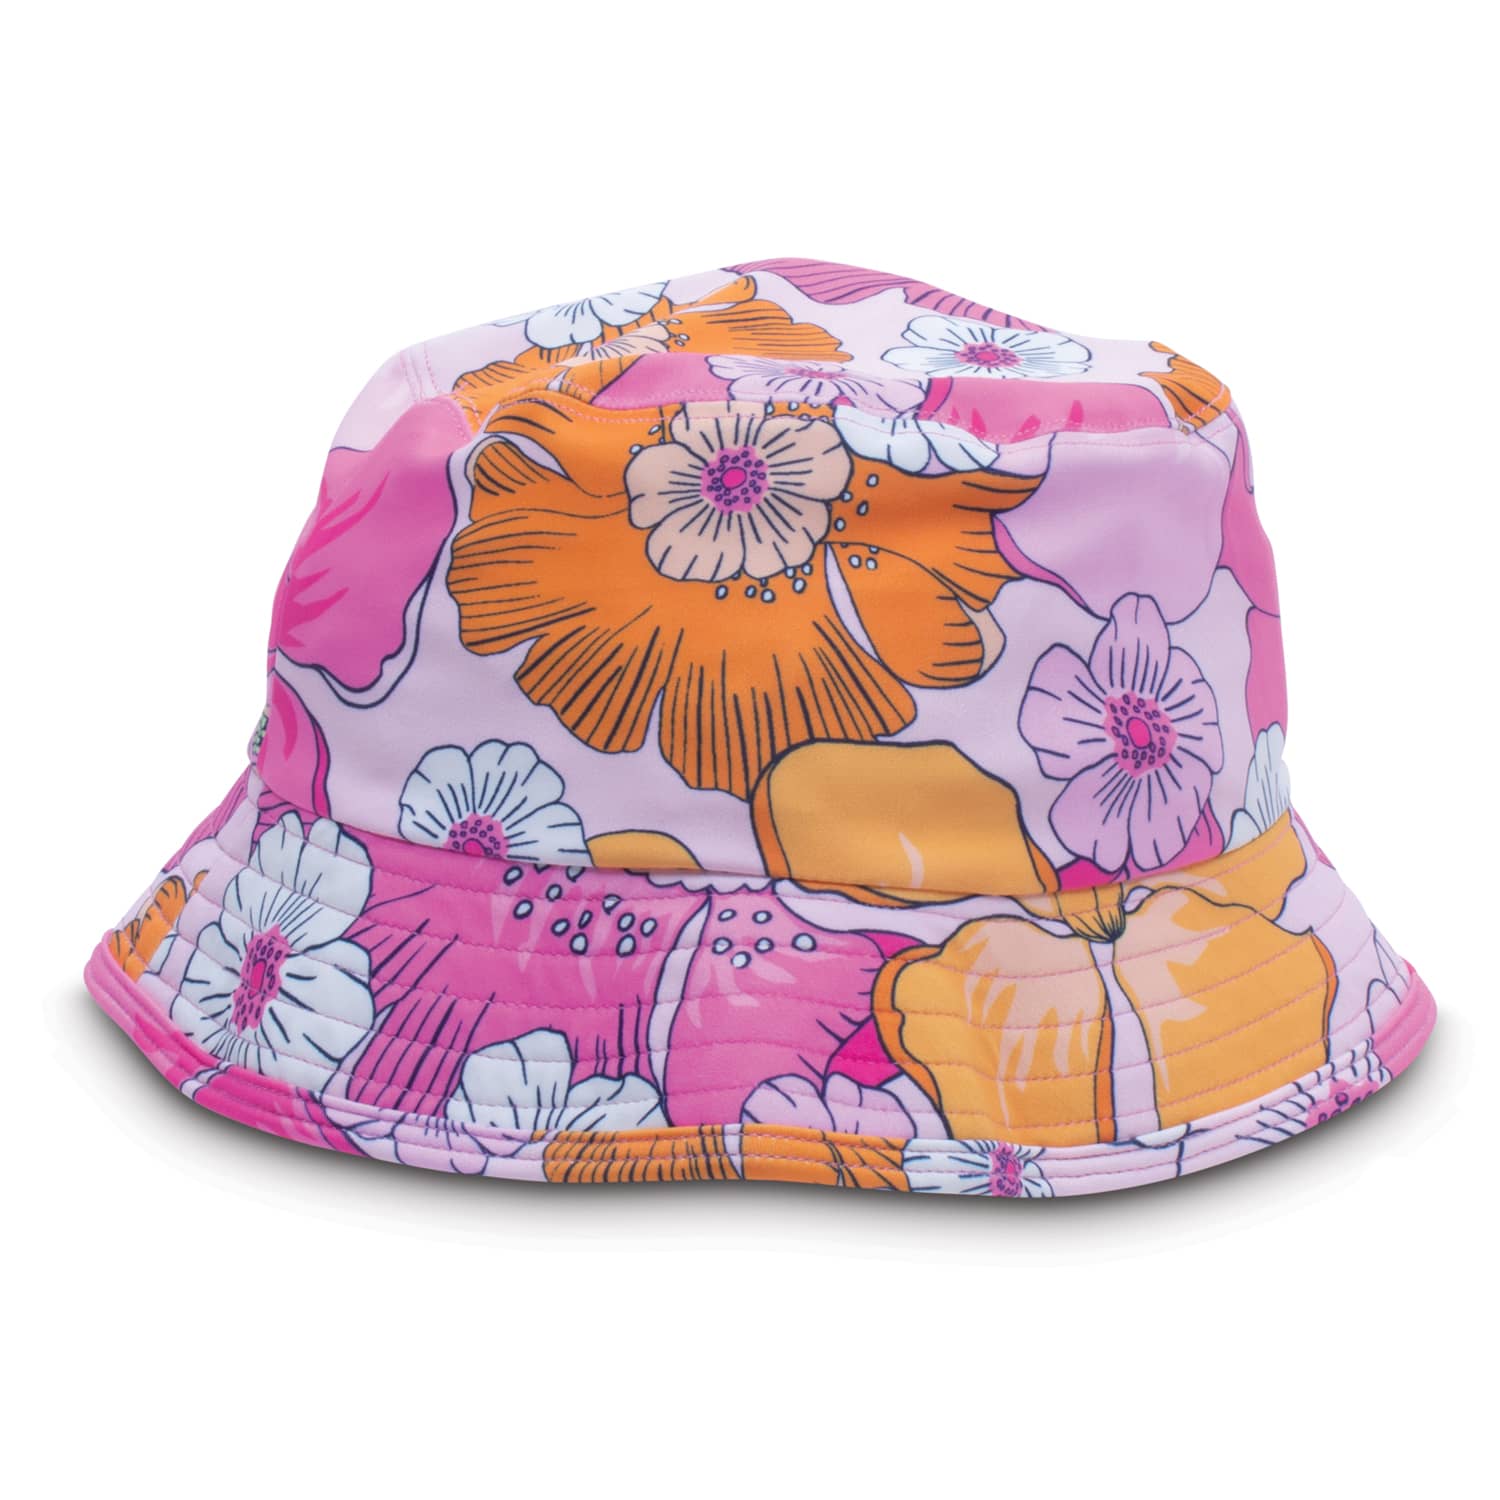 Shade Critters Blooming Hibiscus Girls Sun Bucket Hat 3-14 - Youth lg/Youth XL